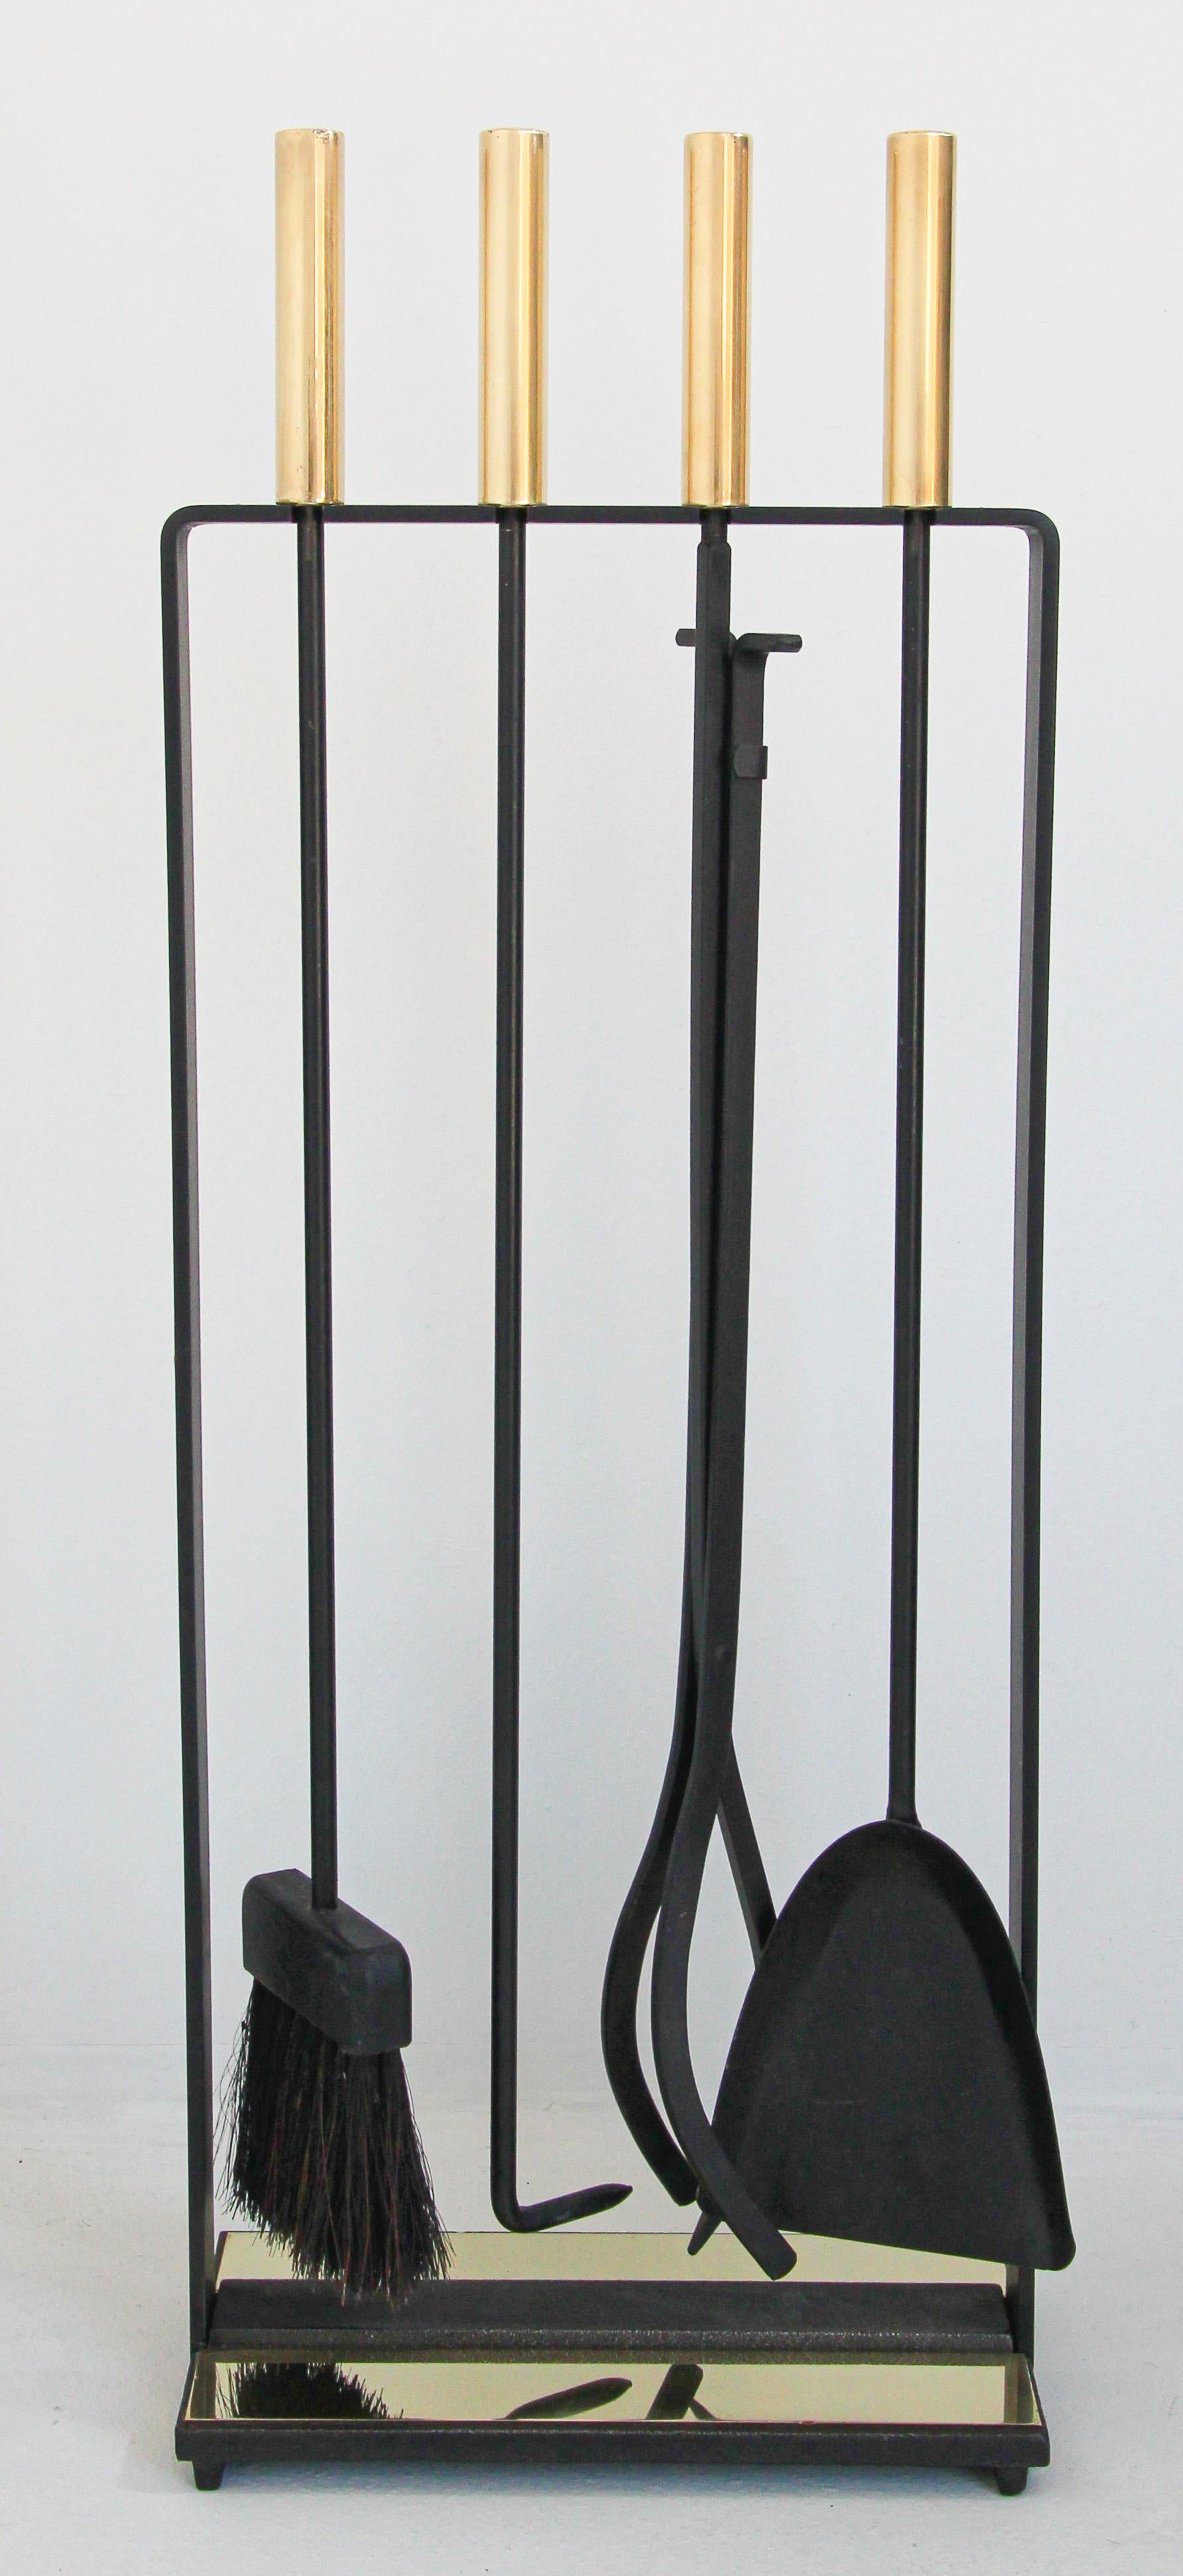 Stunning set of 1960's modernist brass and iron fireplace tools by Pilgrim.
Modernist Wrought Iron and Brass Fireplace Tools by Pilgrim Manufacturing (Maker)
Modernist, five-piece, fire tools set by Pilgrim attributed to George Nelson features a